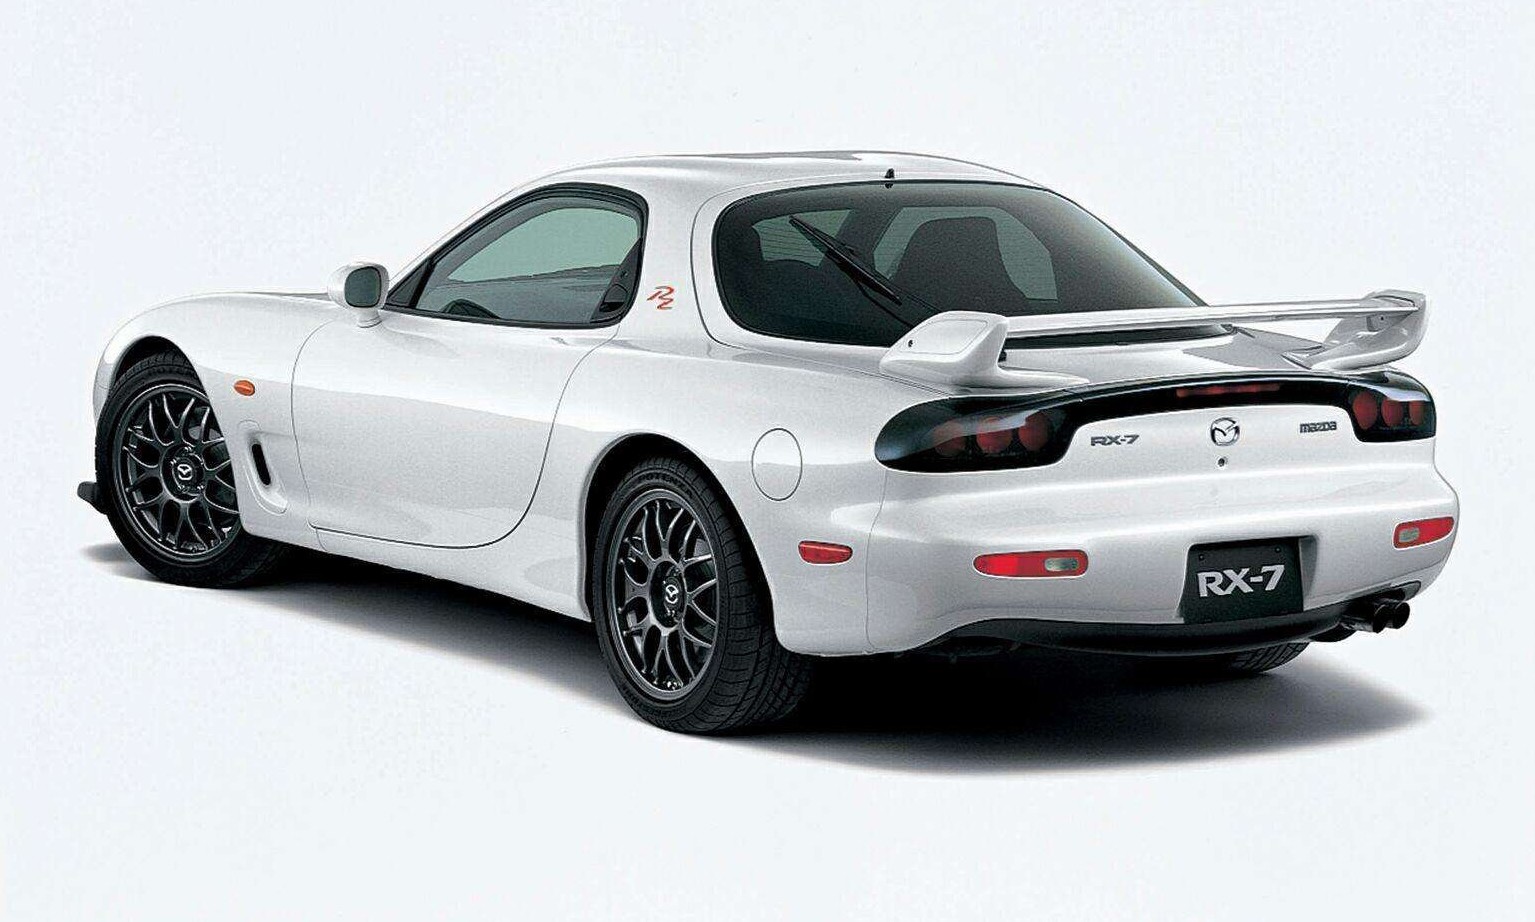 Images of Mazda RX-7 | 1535x922